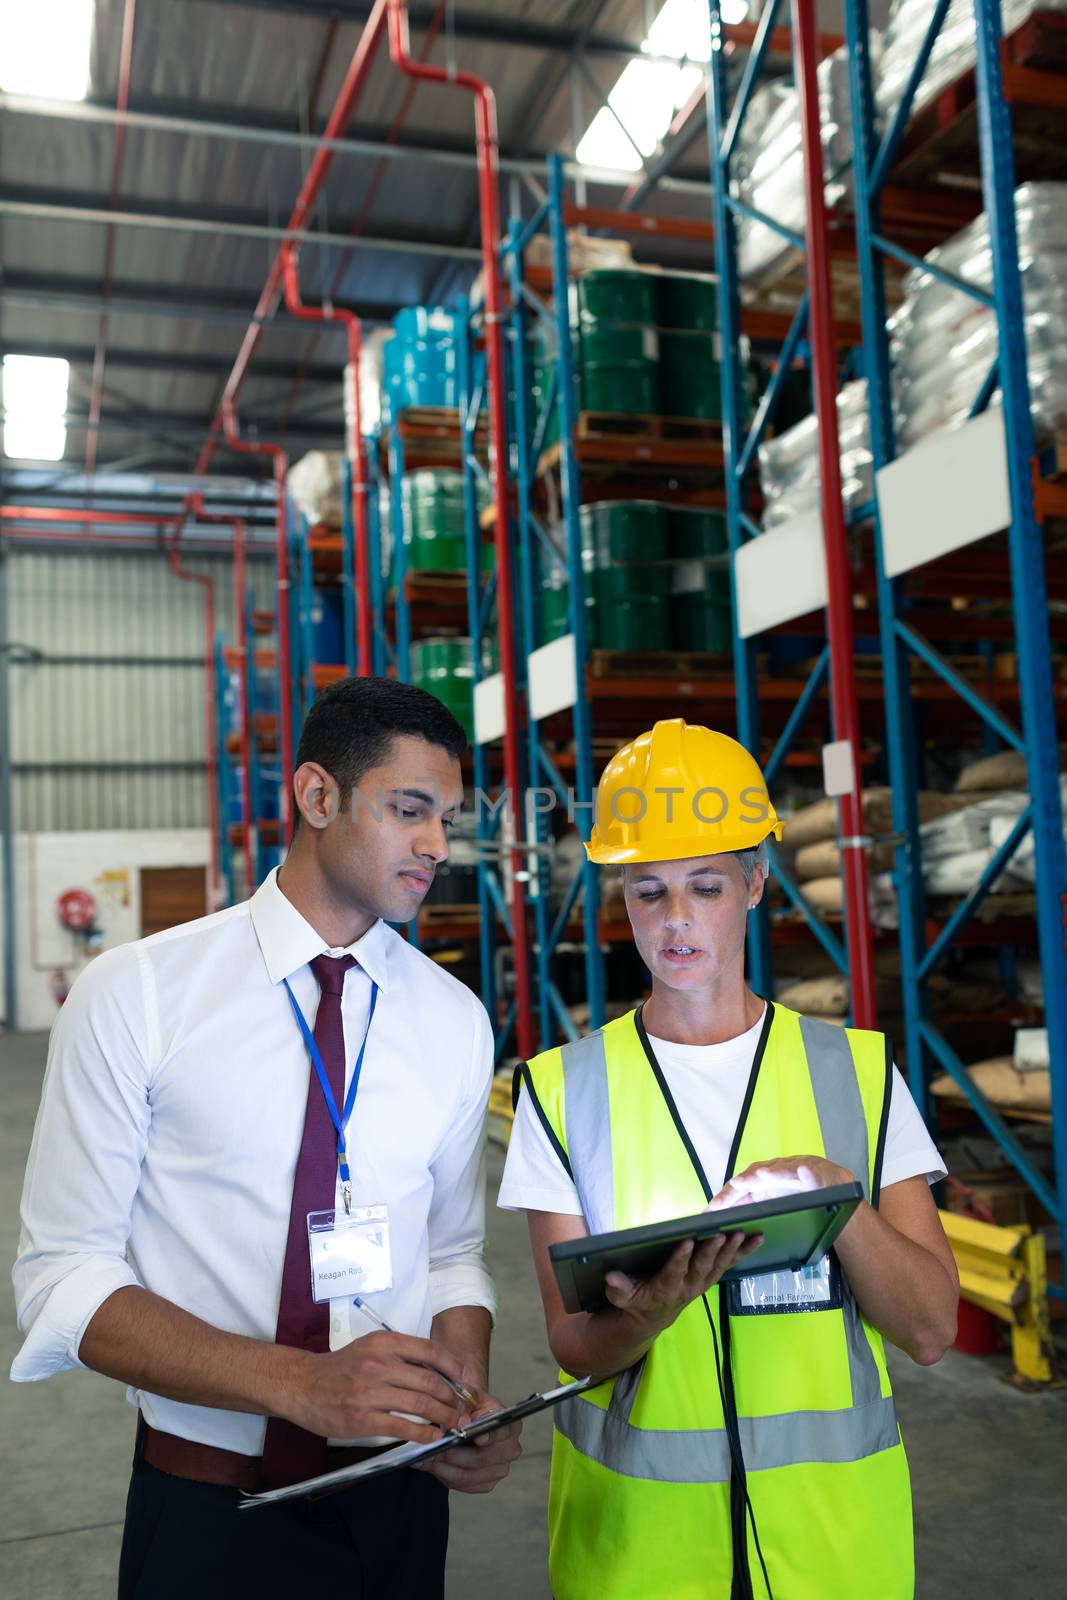 Front view of diverse Attentive warehouse staffs discussing over digital tablet in warehouse. This is a freight transportation and distribution warehouse. Industrial and industrial workers concept